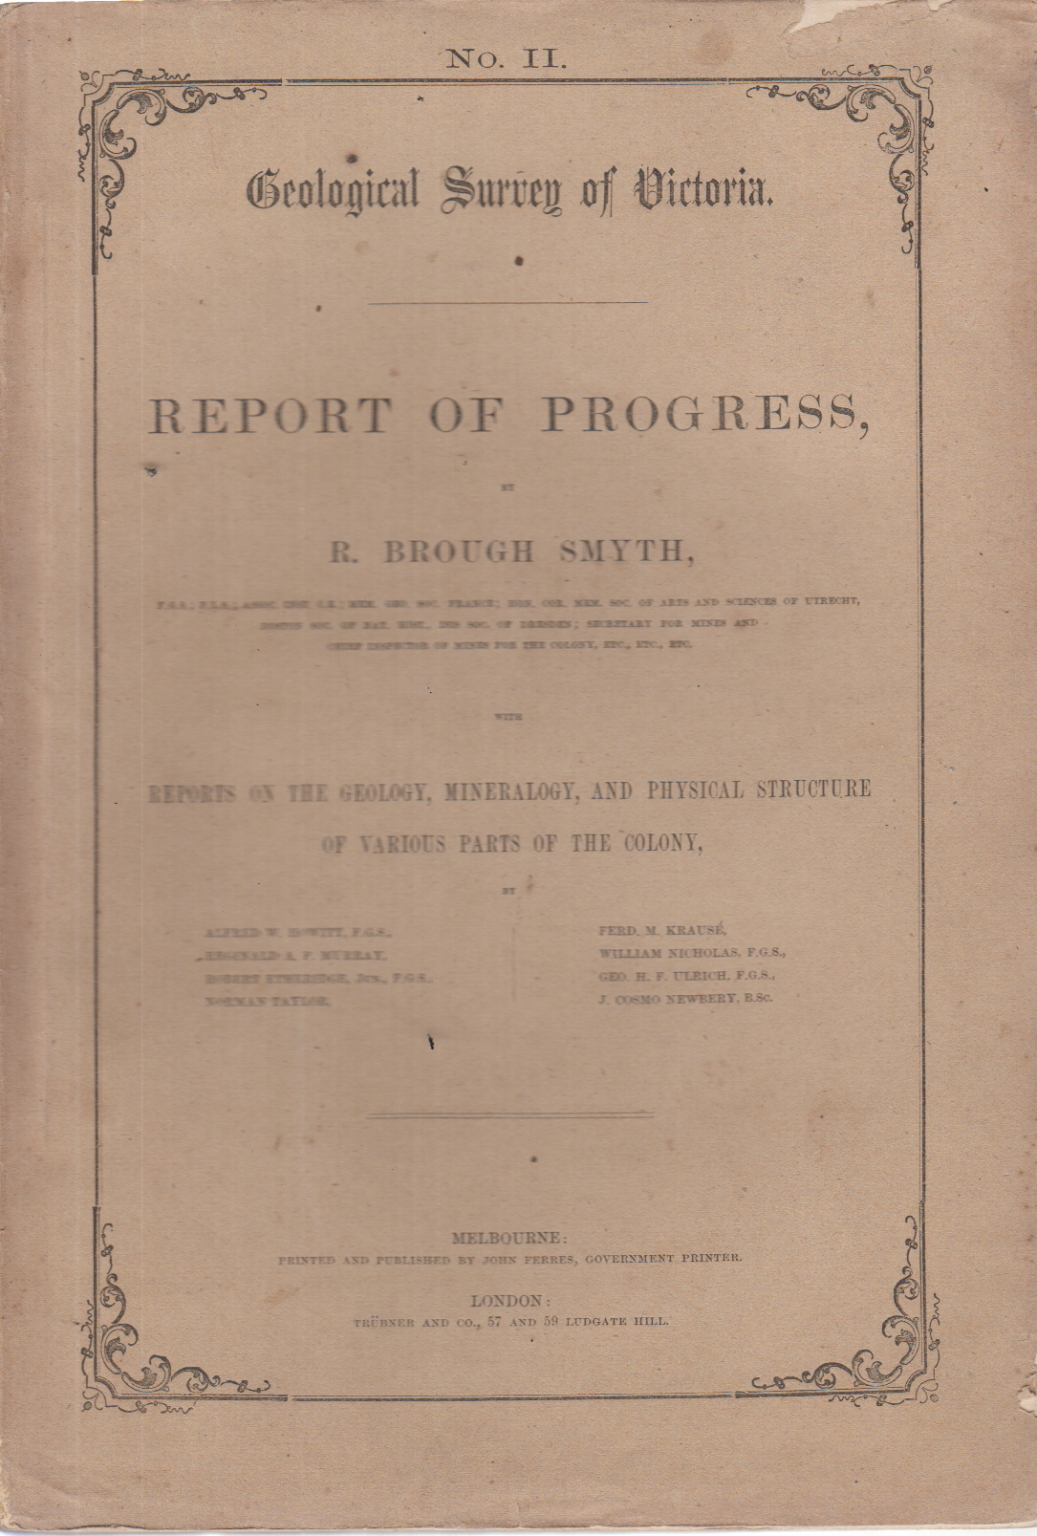 Geological Survey of Victoria. Report of progress, AA.VV.